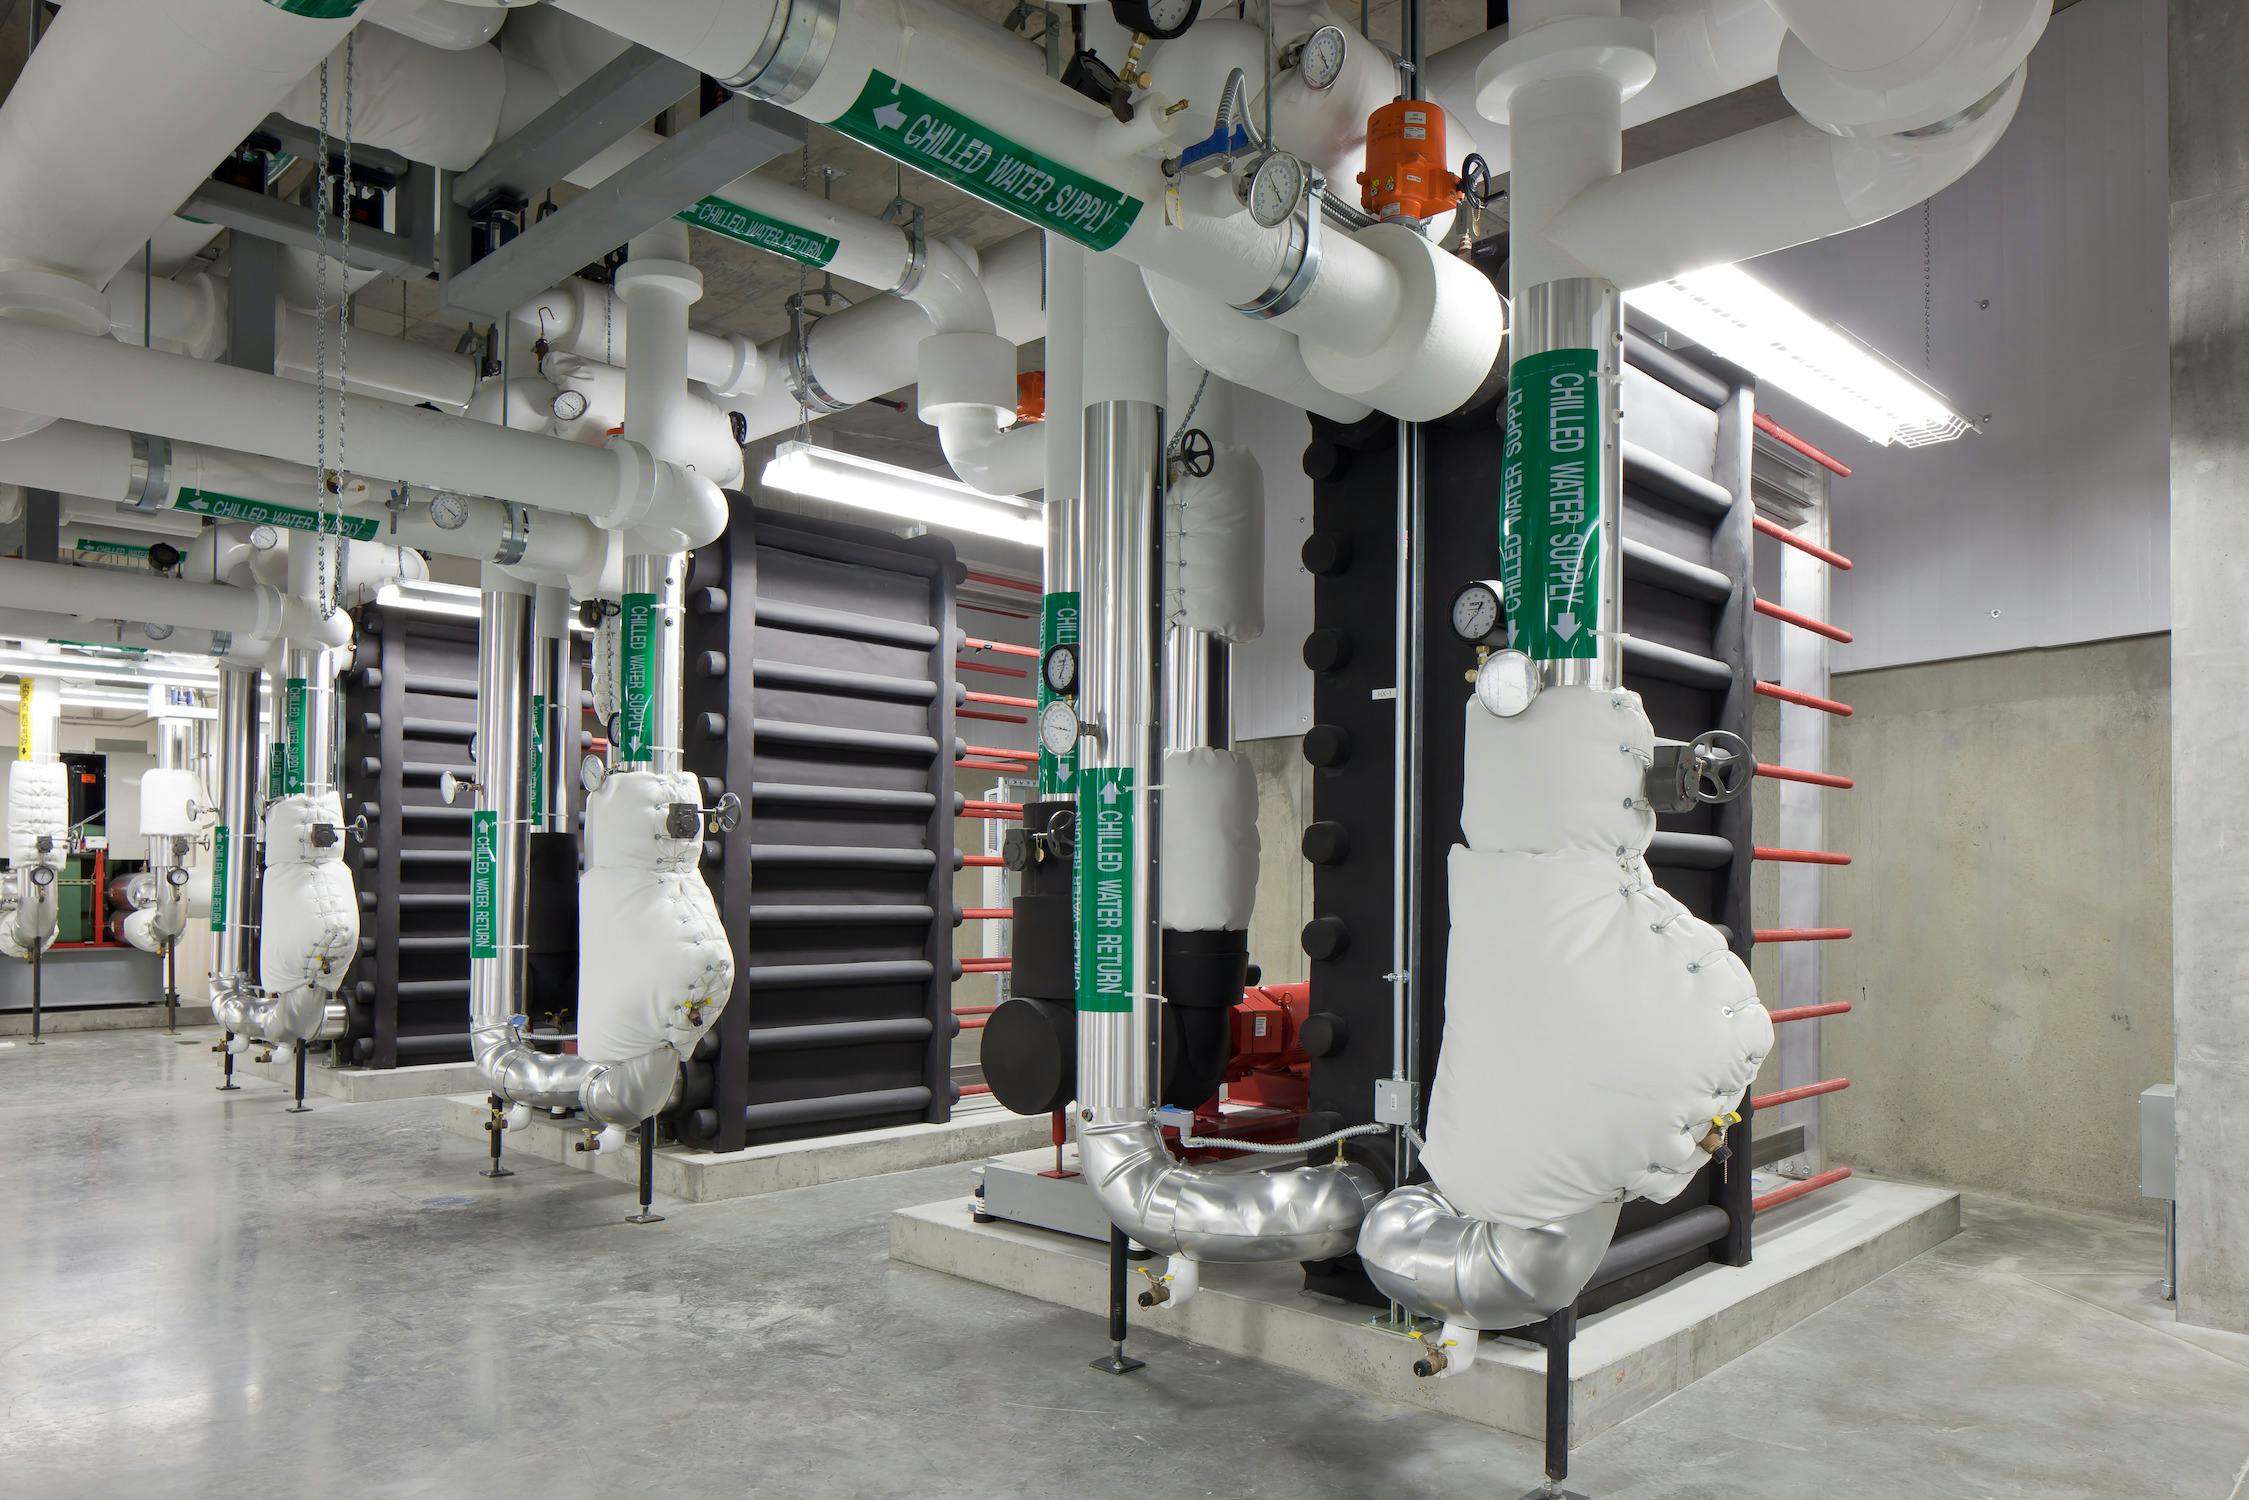 Plate-frame heat exchangers